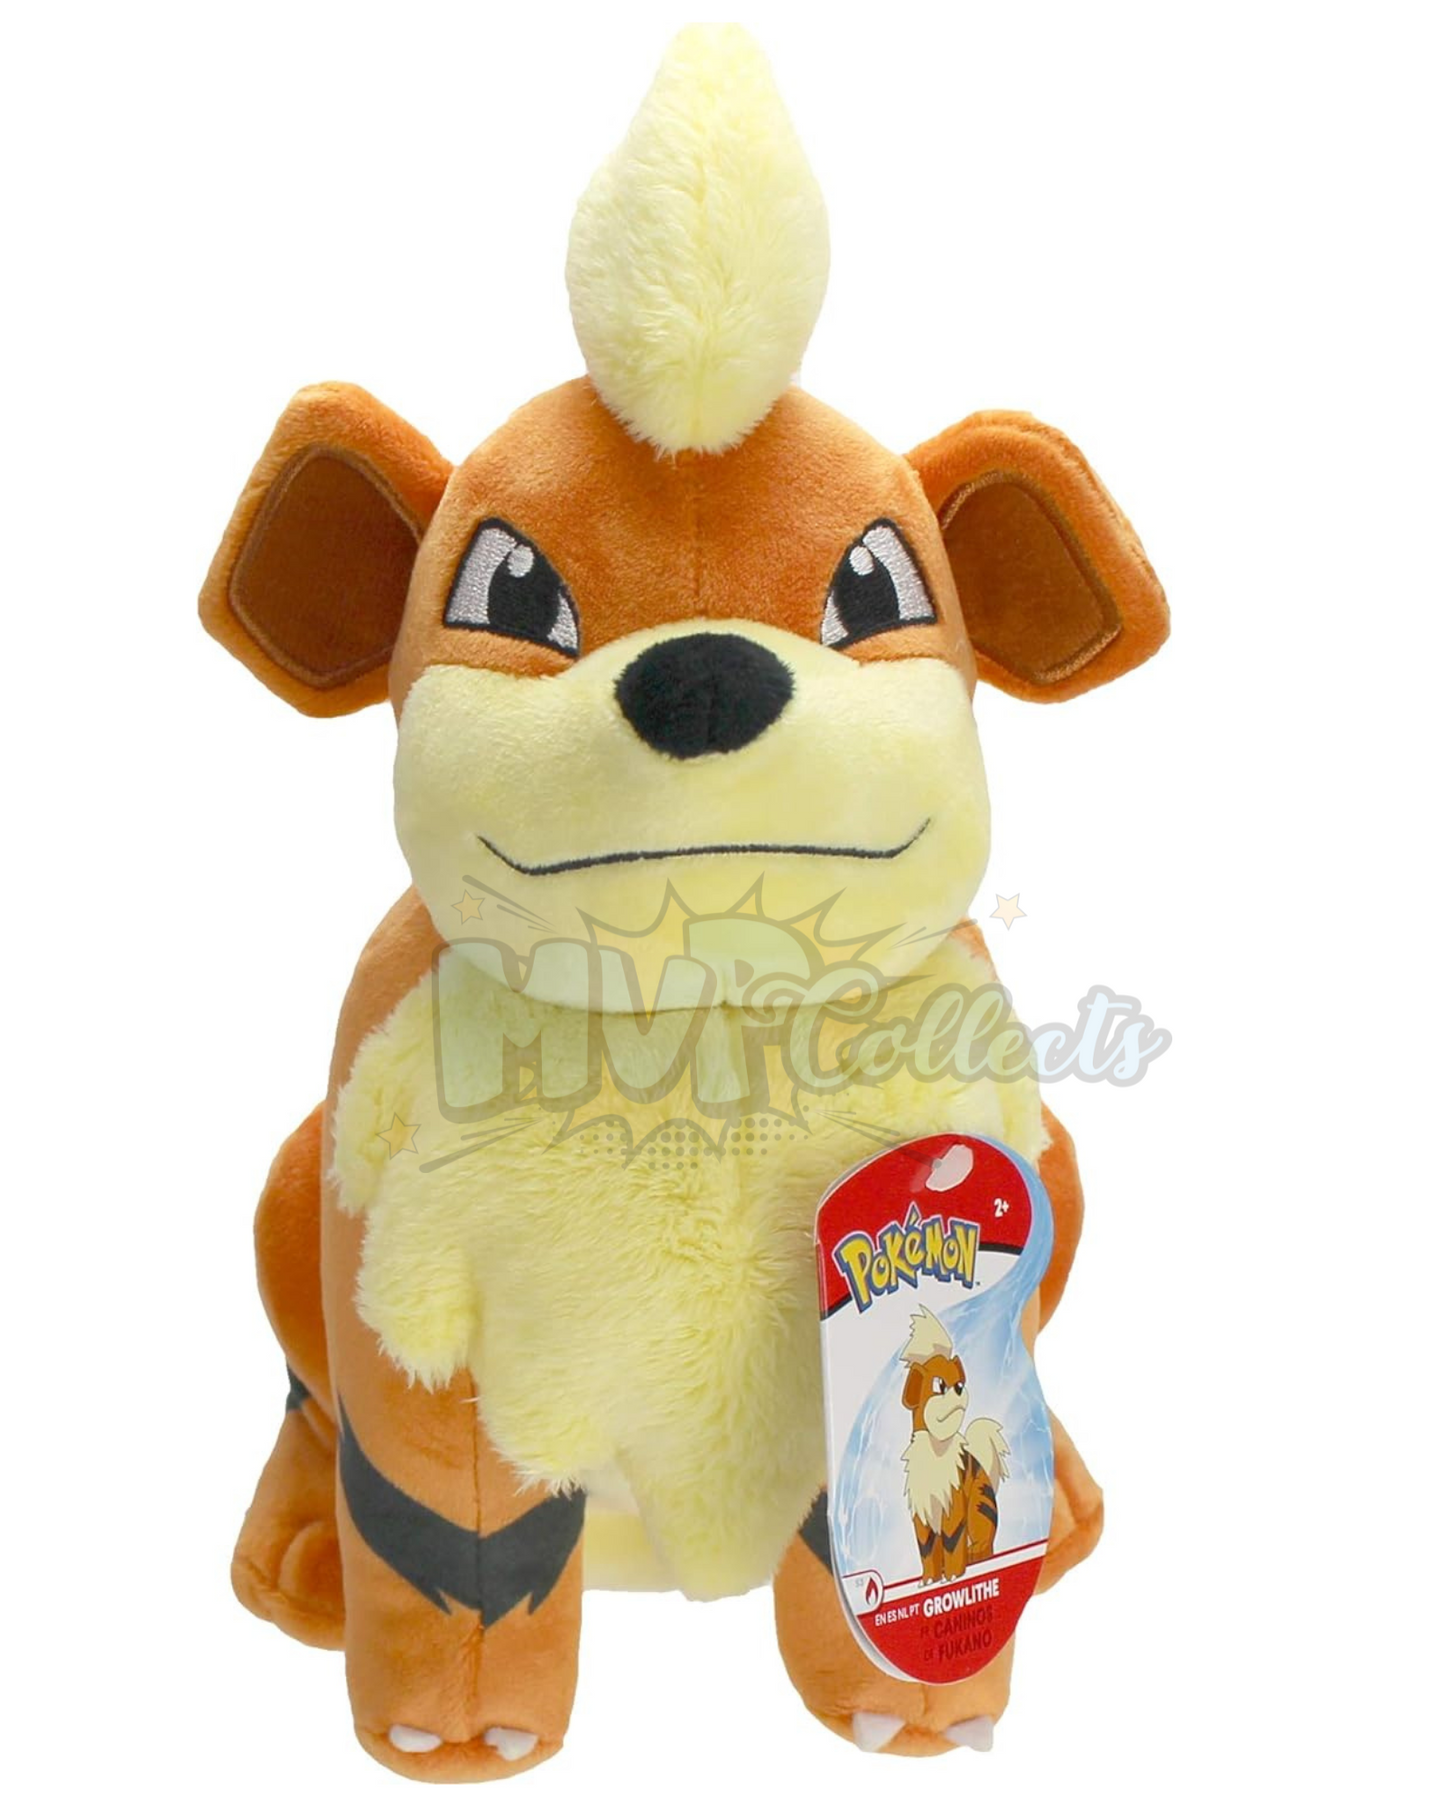 Wicked Cool Toys Pokemon Growlithe Plush Stuffed Animal - 8 inches